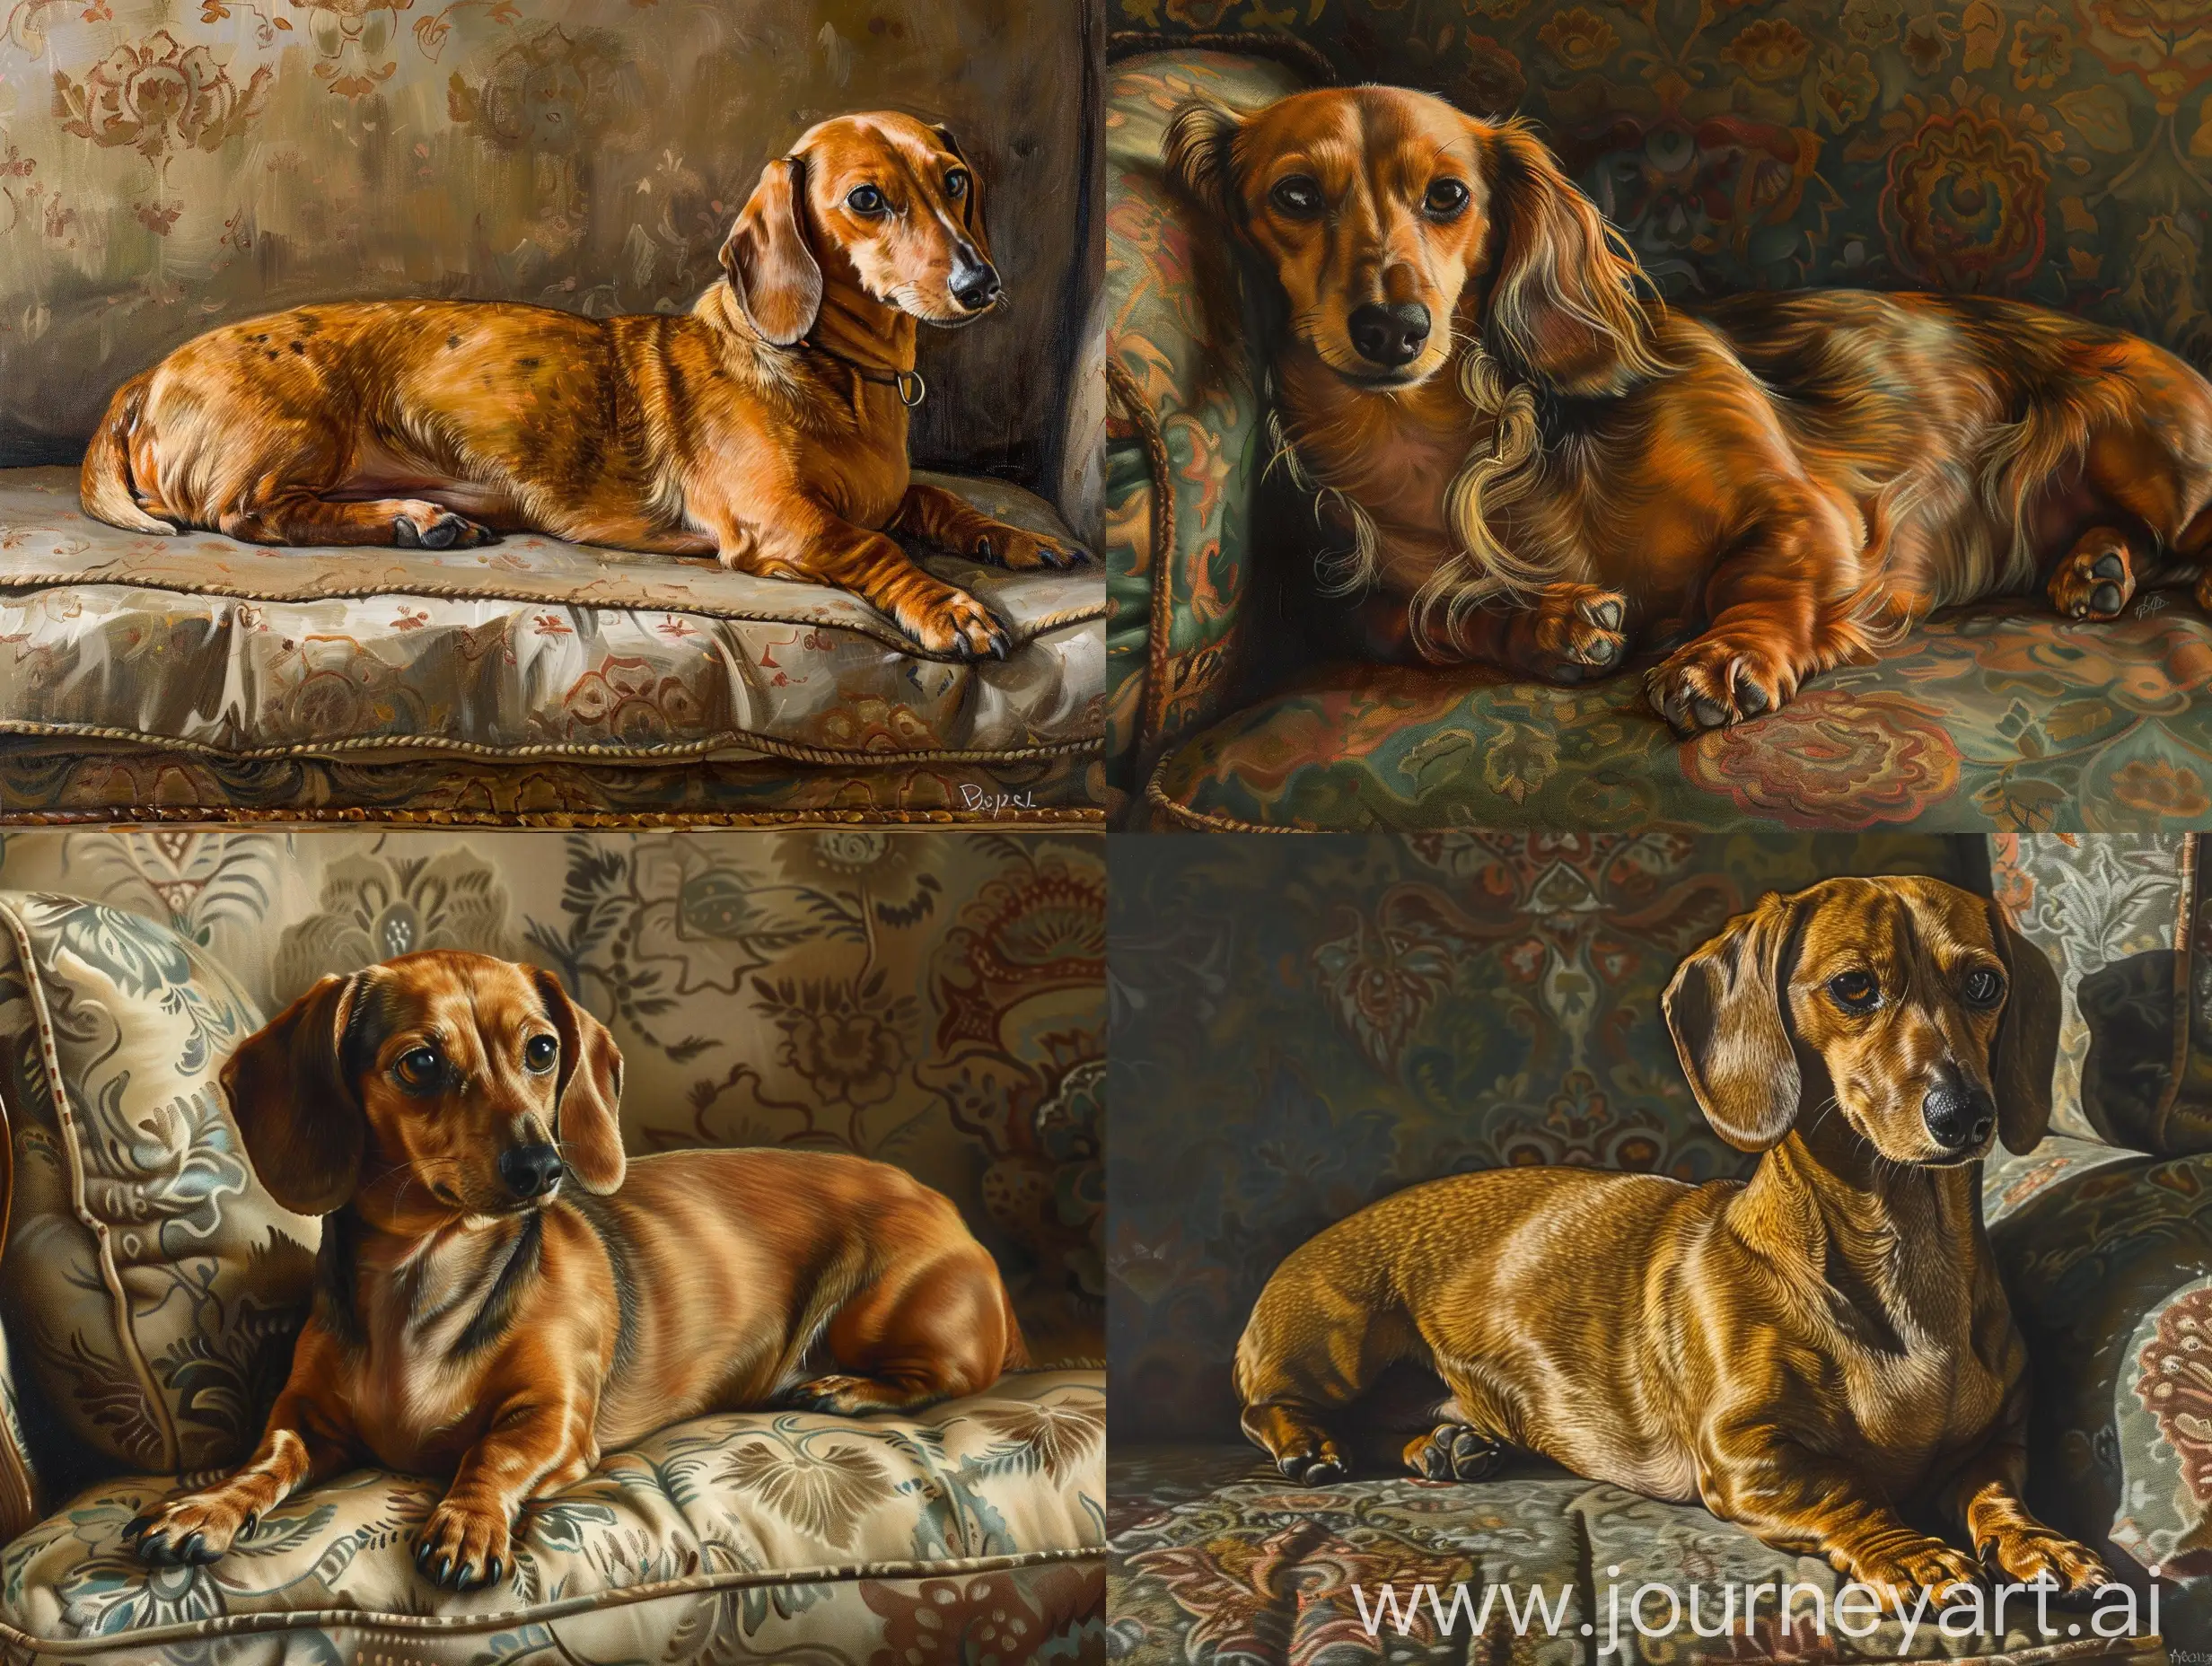 A female dachshund lies sideways on a couch, painting, hd, dramatic lighting, detailed